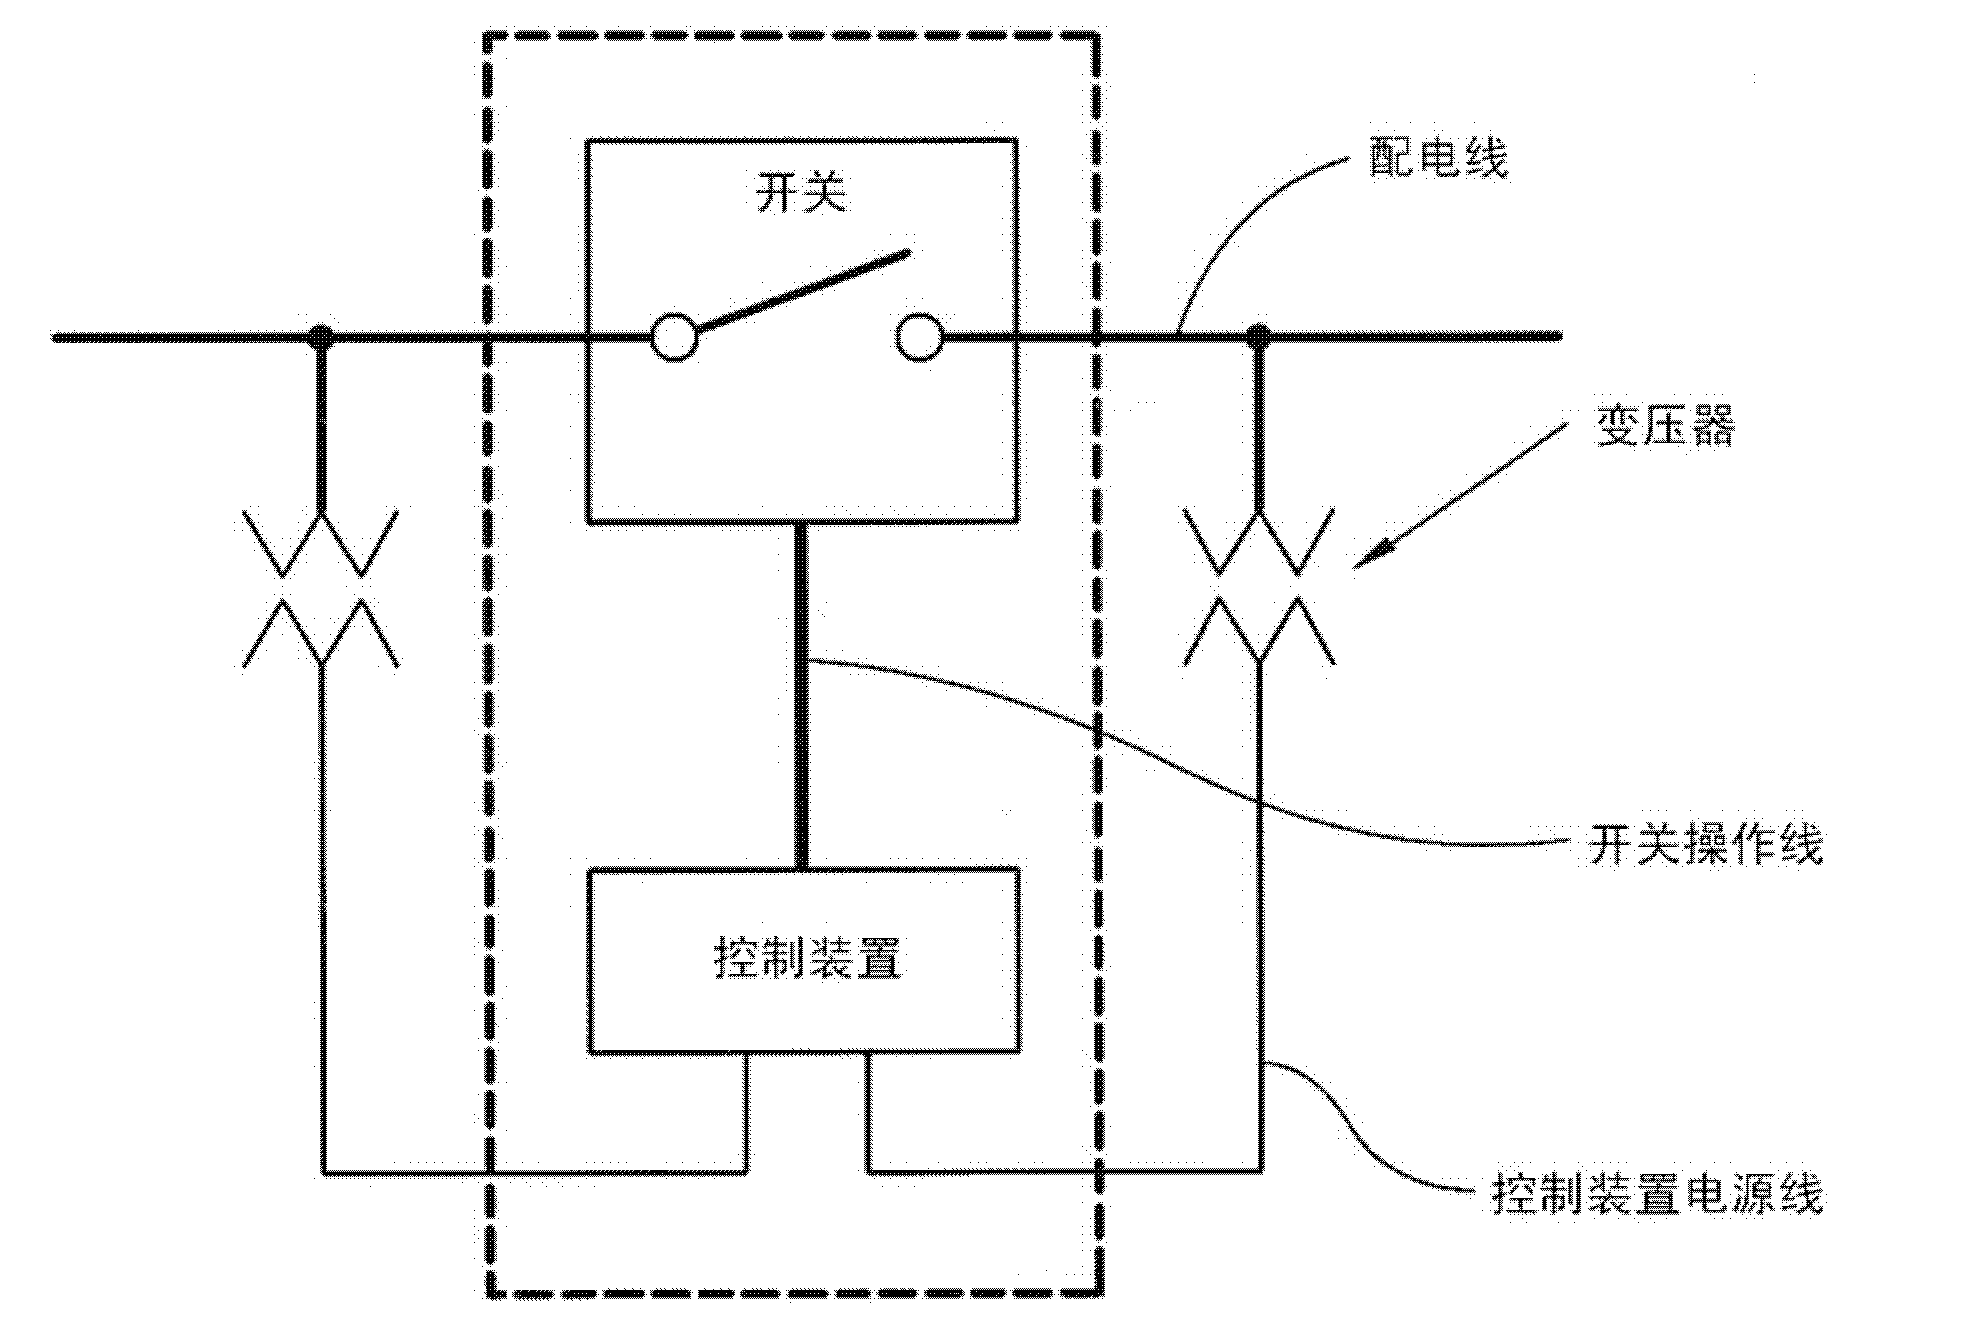 Automatic switching system of high-voltage distribution wires